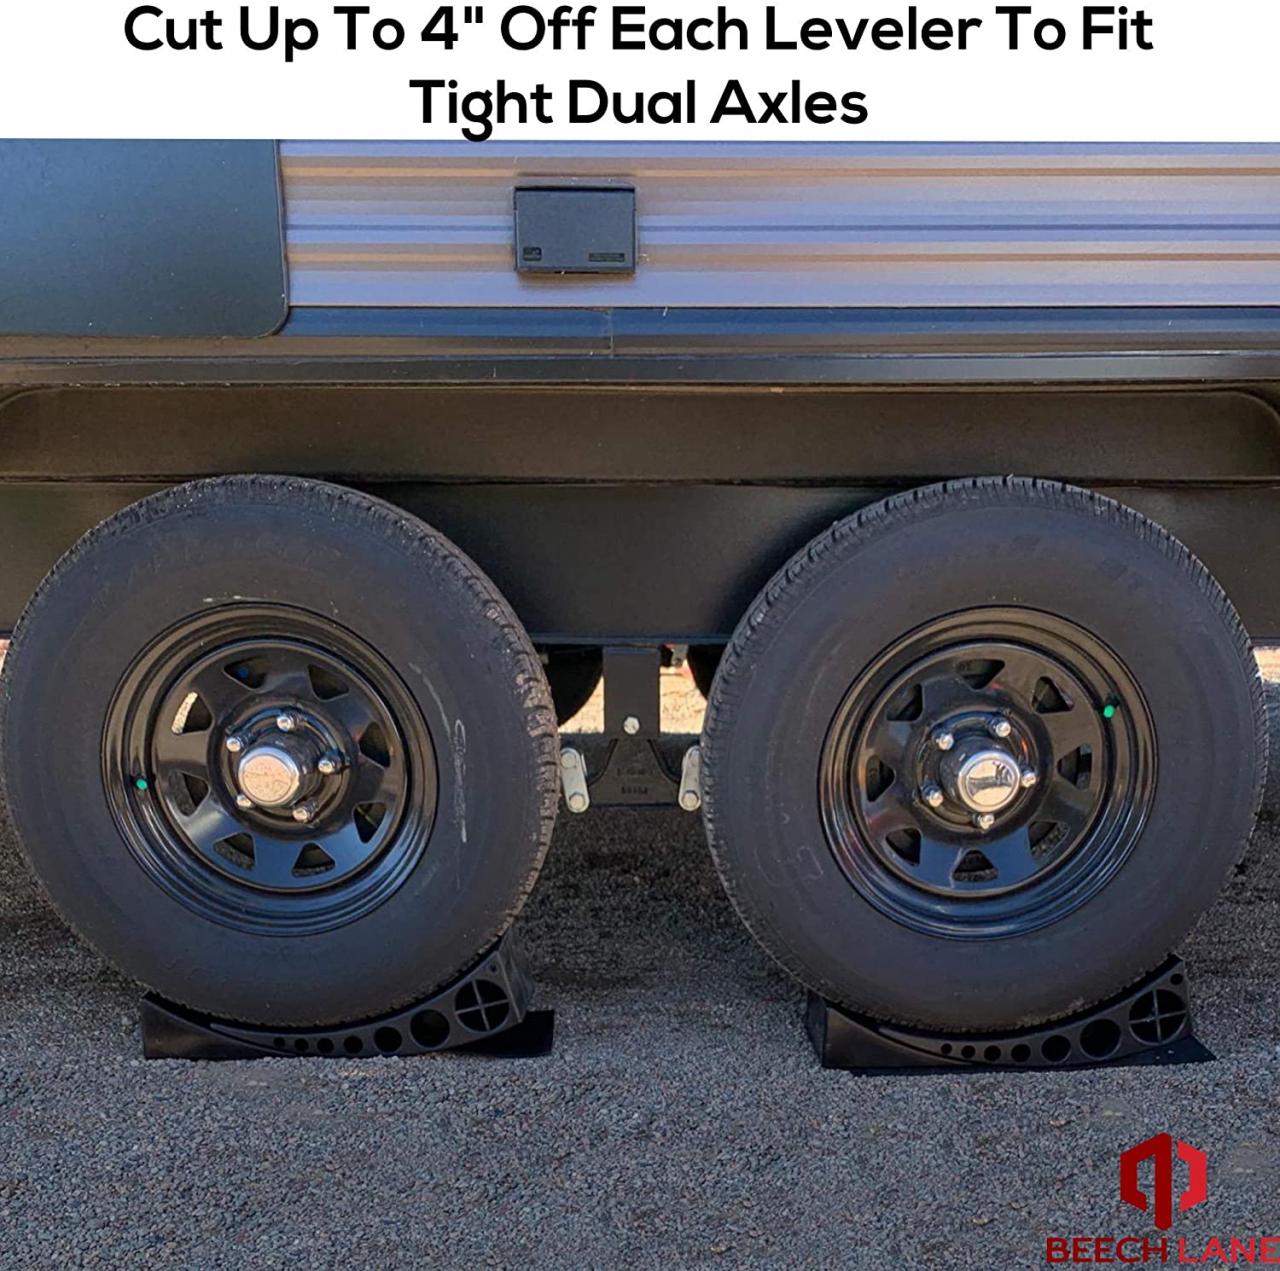 Super-Easy Tips and Tricks for Leveling your RV or Travel Trailer -  RVshare.com